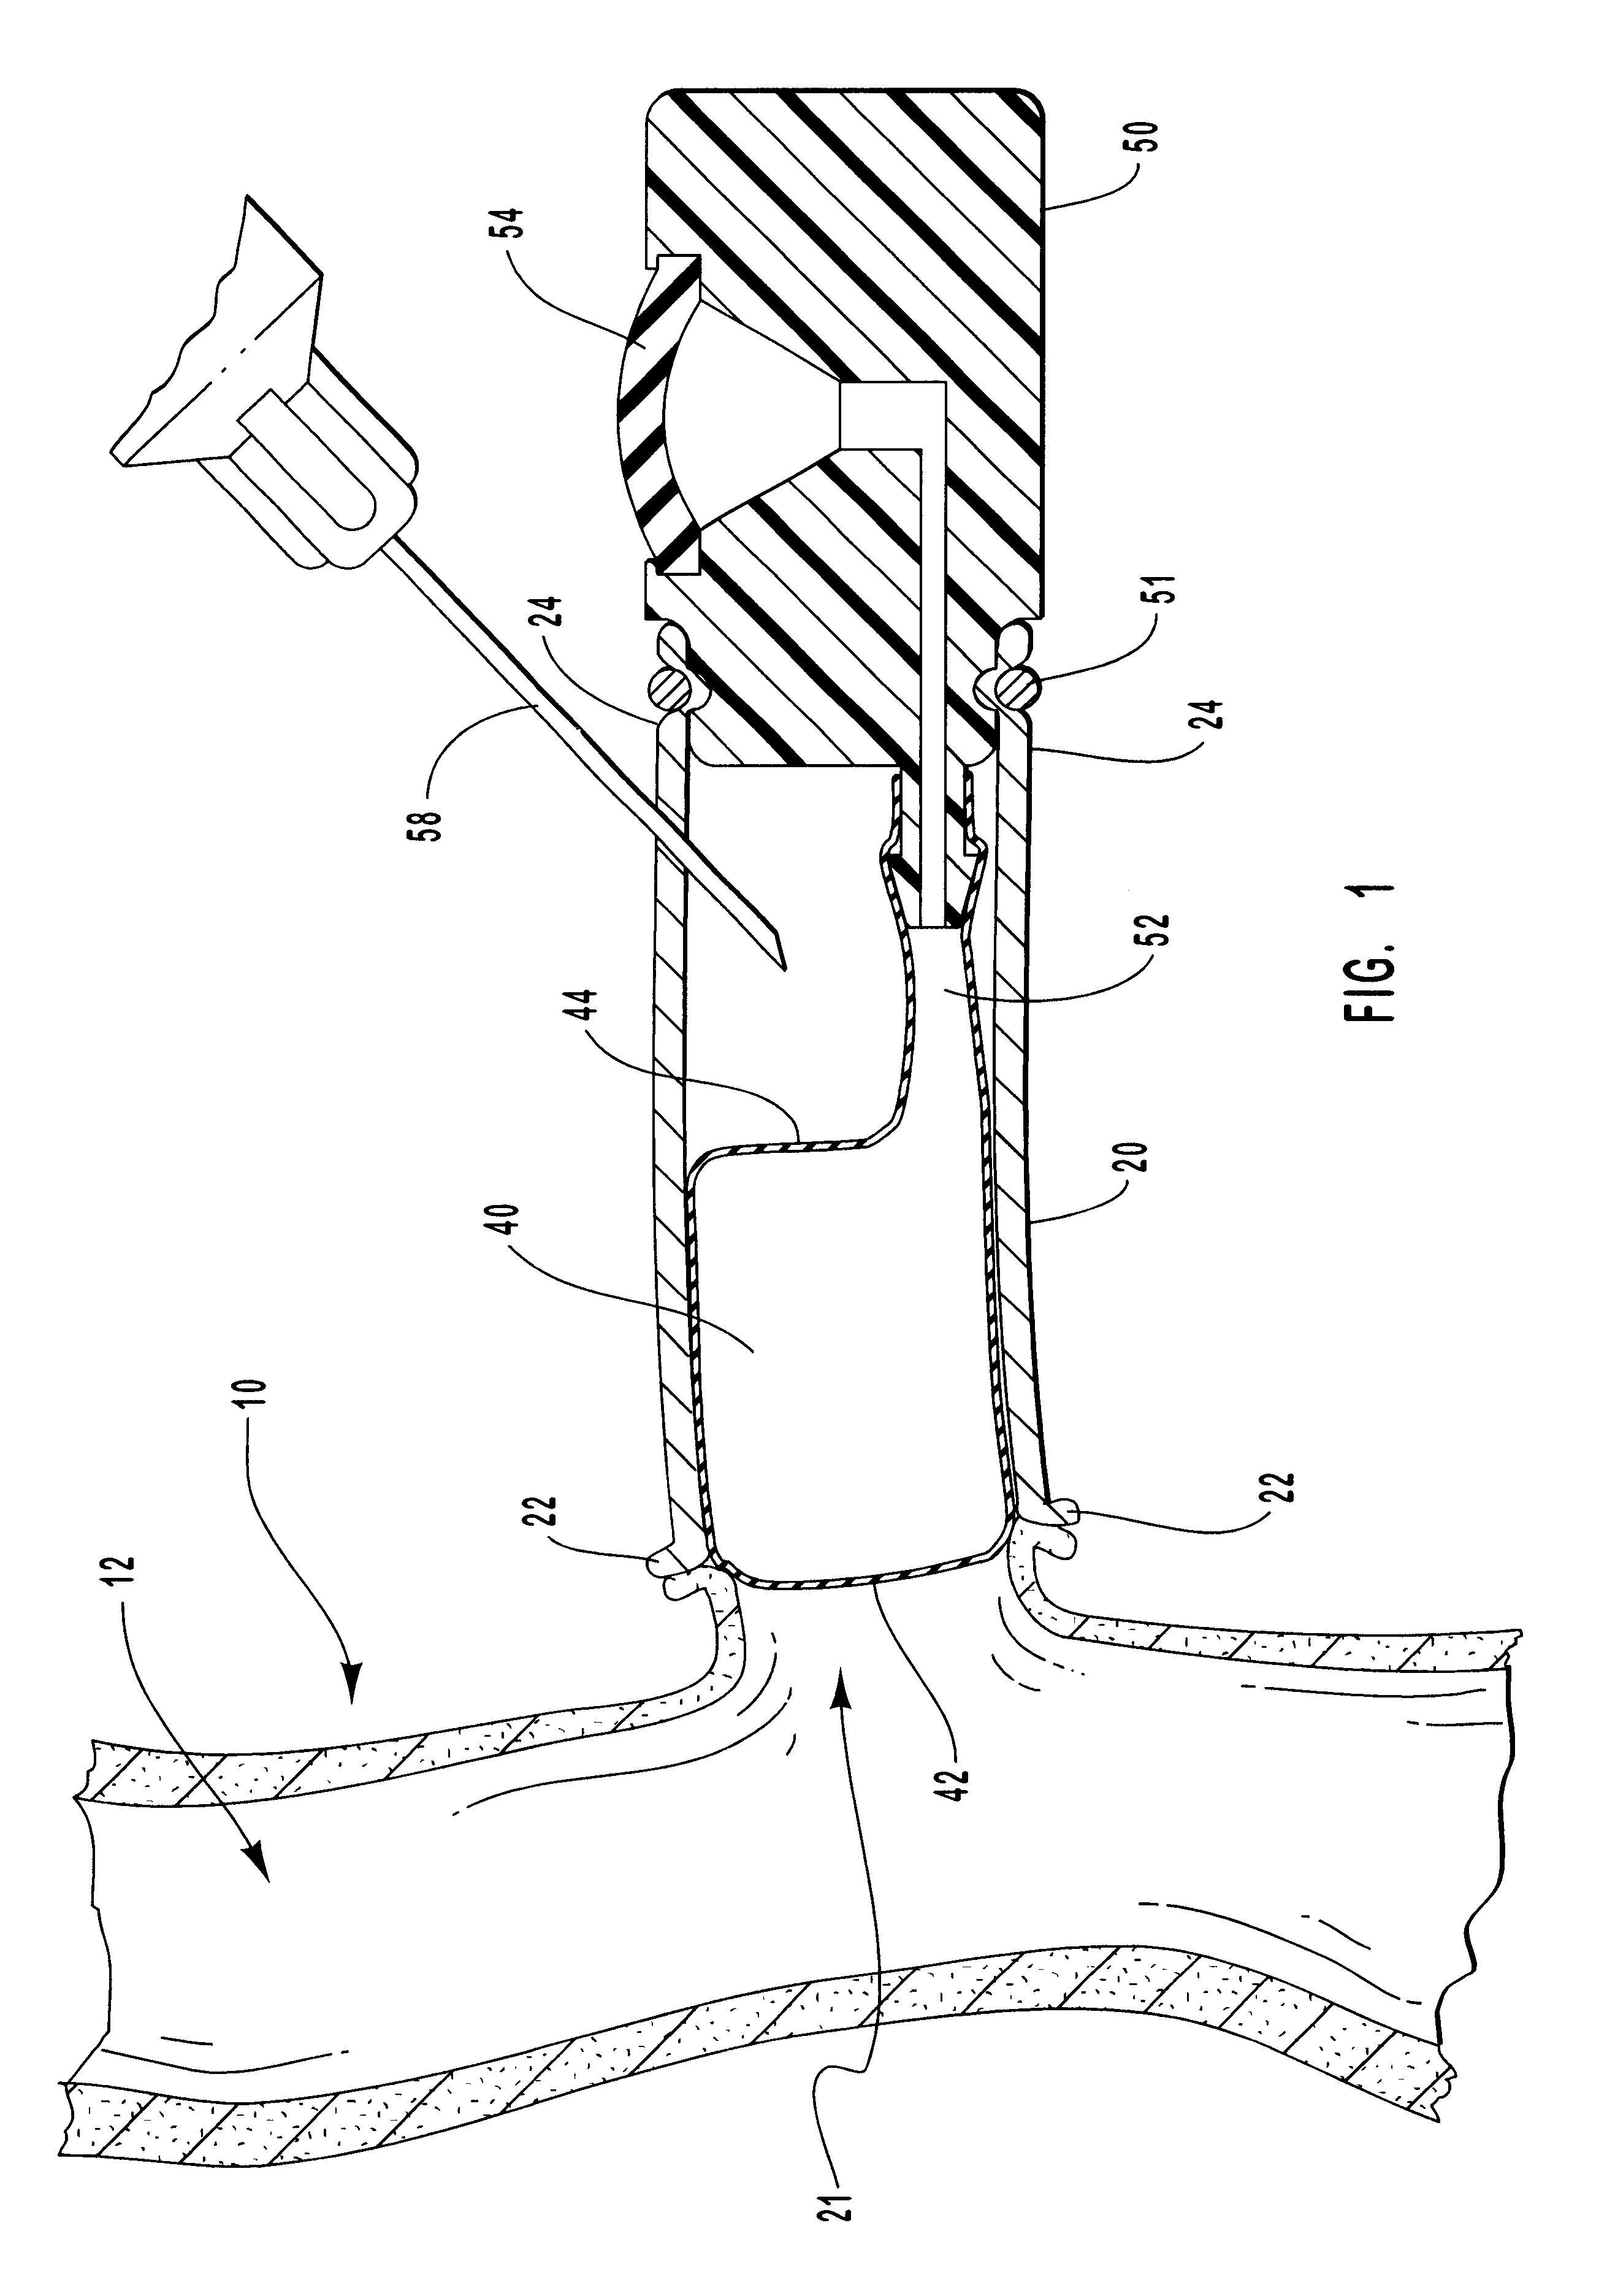 Vascular access devices and systems